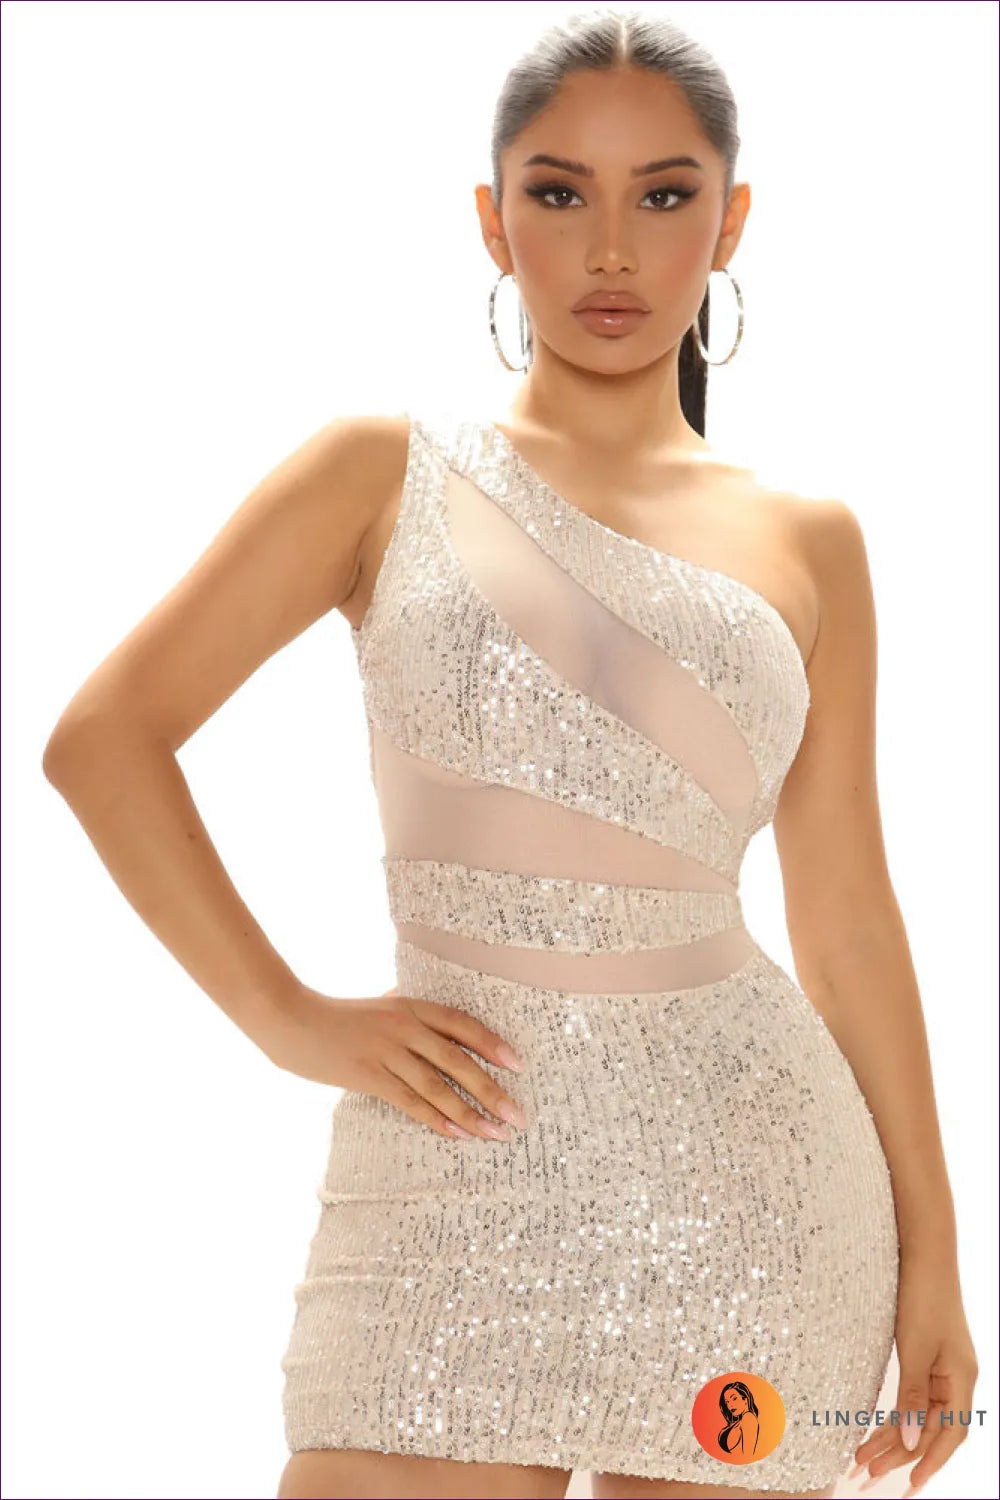 Turn Heads And Set Hearts Racing With Our Sexy Sequin Off-shoulder Dress! Radiate Glam Embrace Allure,